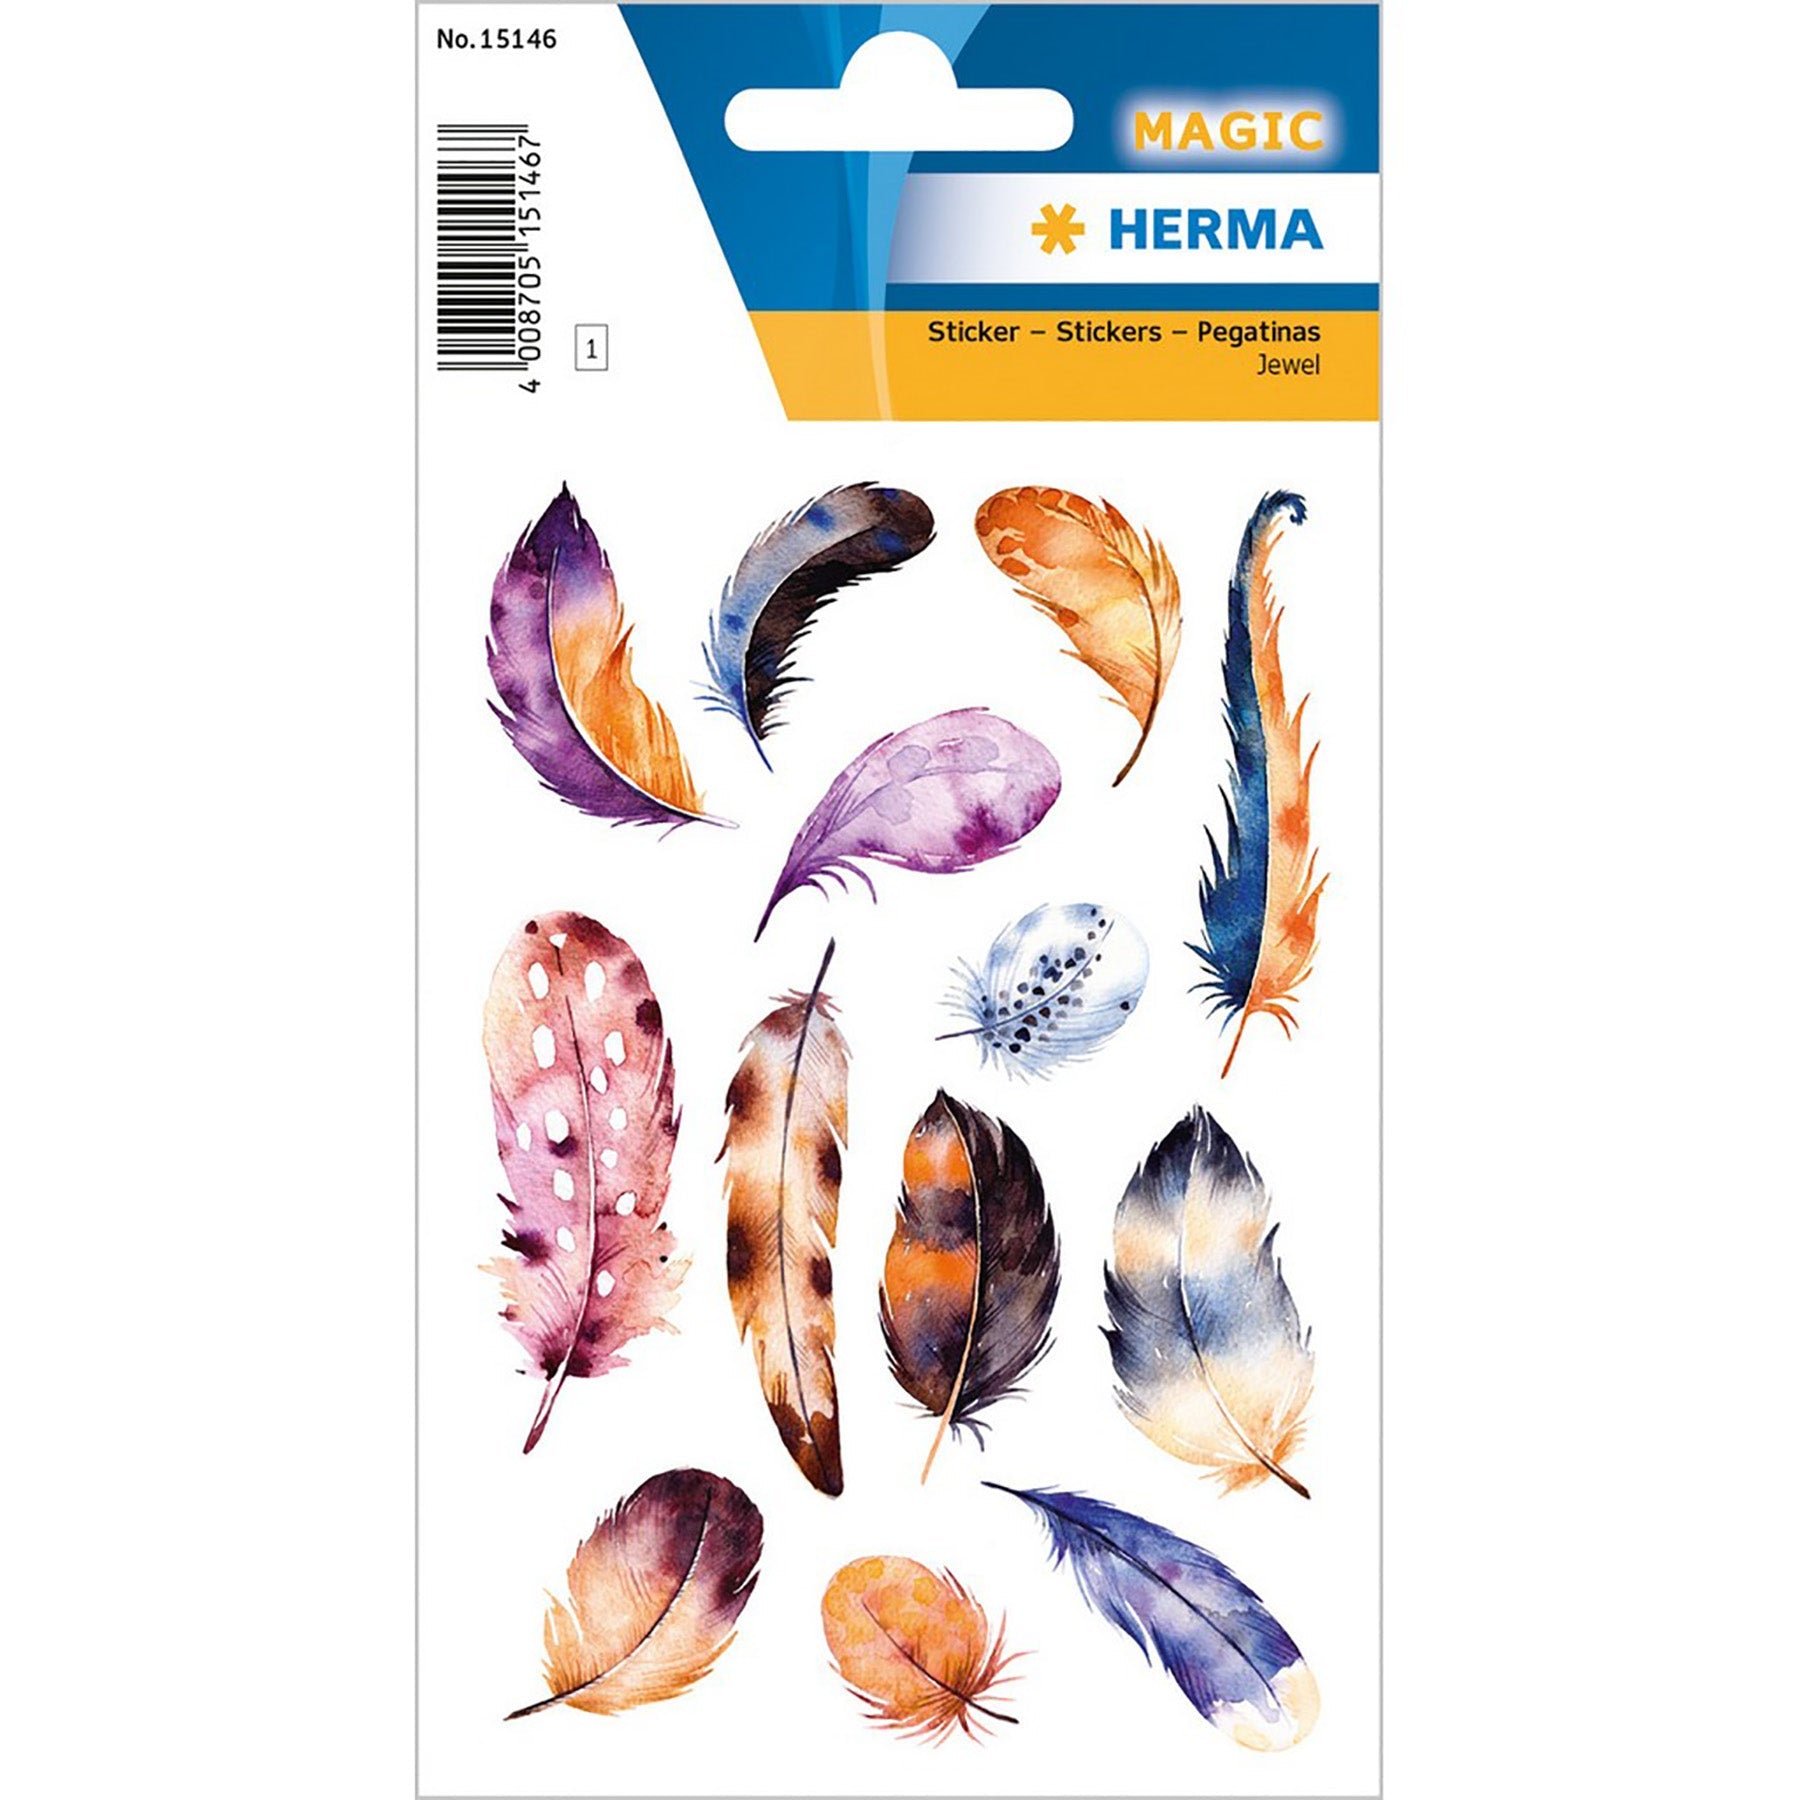 Herma Magic Stickers Feathers with Jewel 4.75x3.1in Sheet